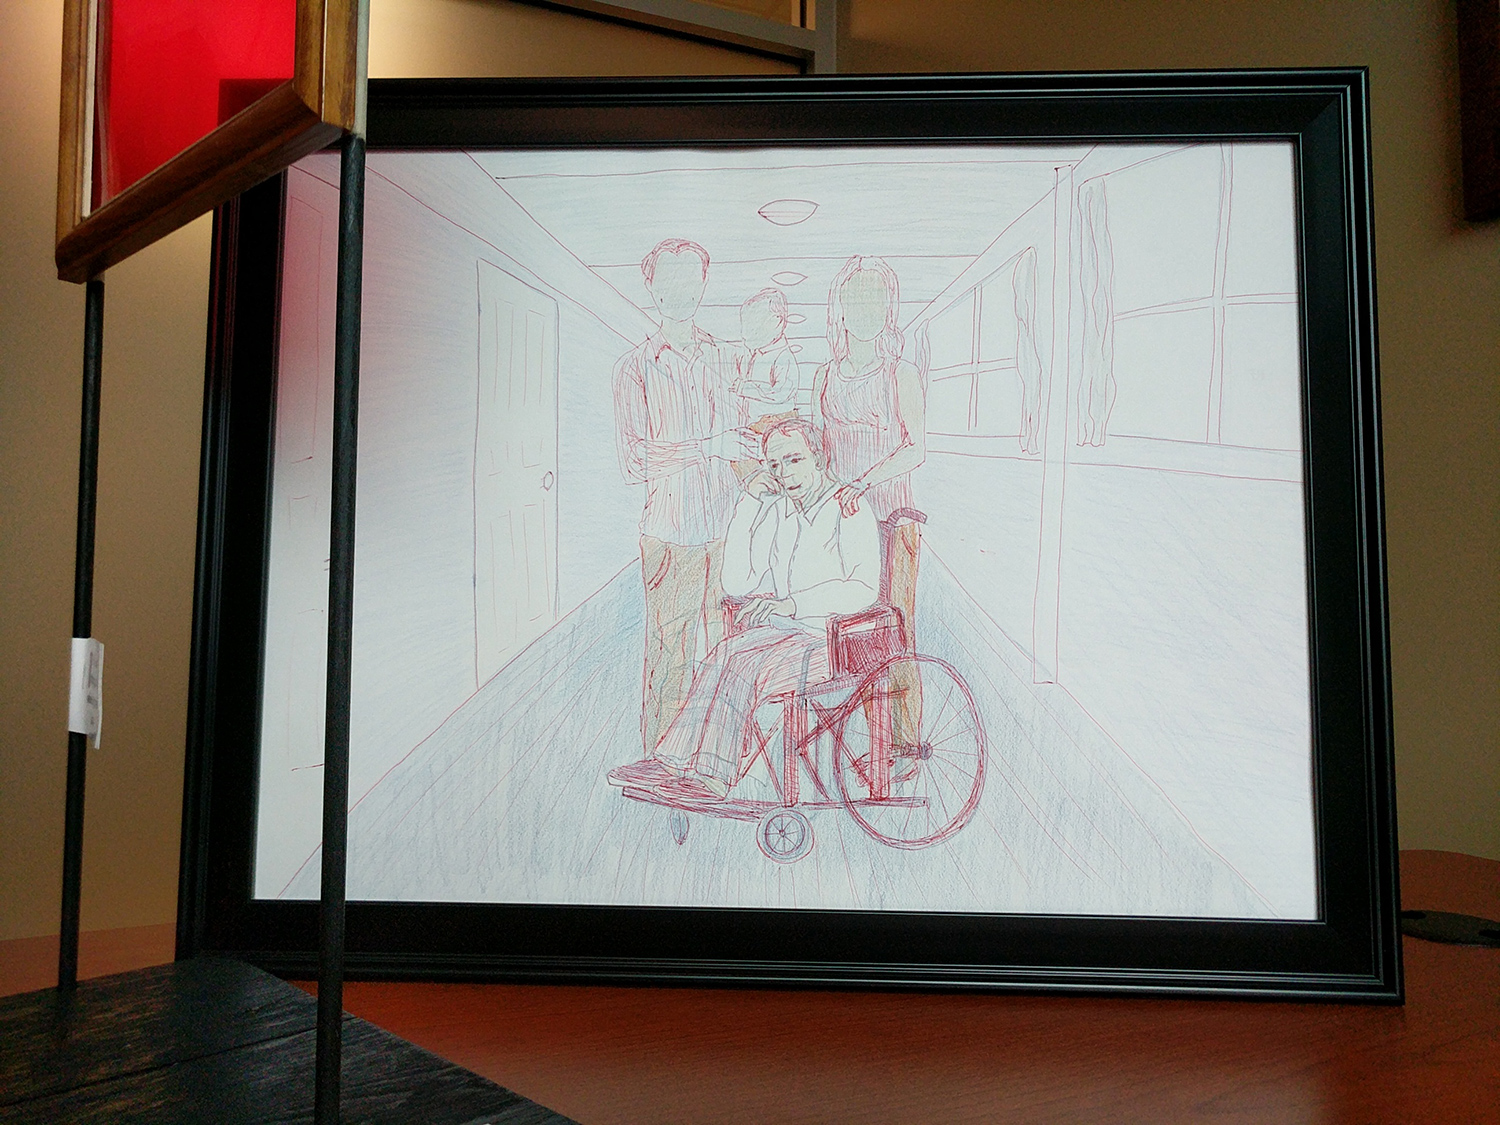 Drawing of a perspective hallway. The focus is of a fully drawn individual sitting in a wheelchair. Behind the wheelchair are three individuals that appear to be a man, woman and child, however their faces are blank.